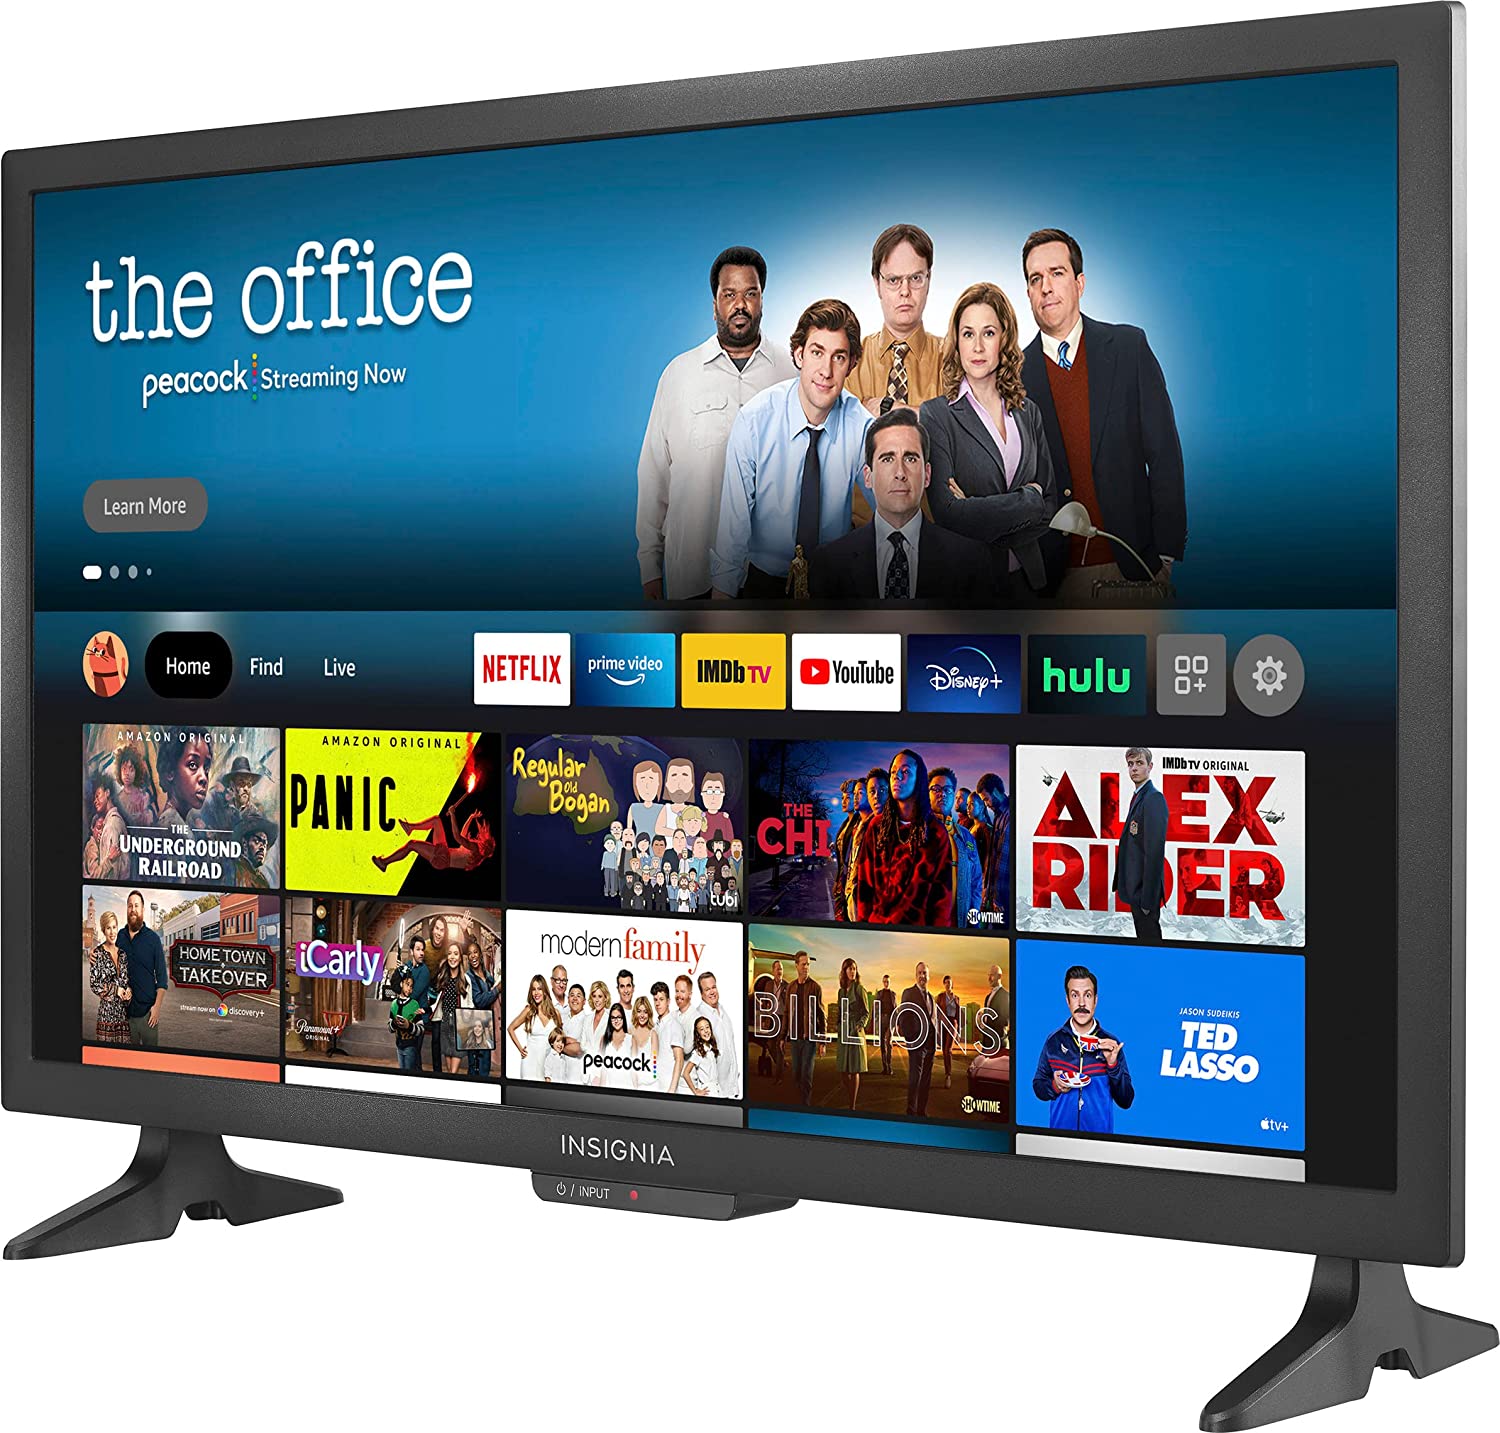 Deal Alert! Amazon’s Fire TV Edition Smart TVs Are on Sale Starting at Just $79.99